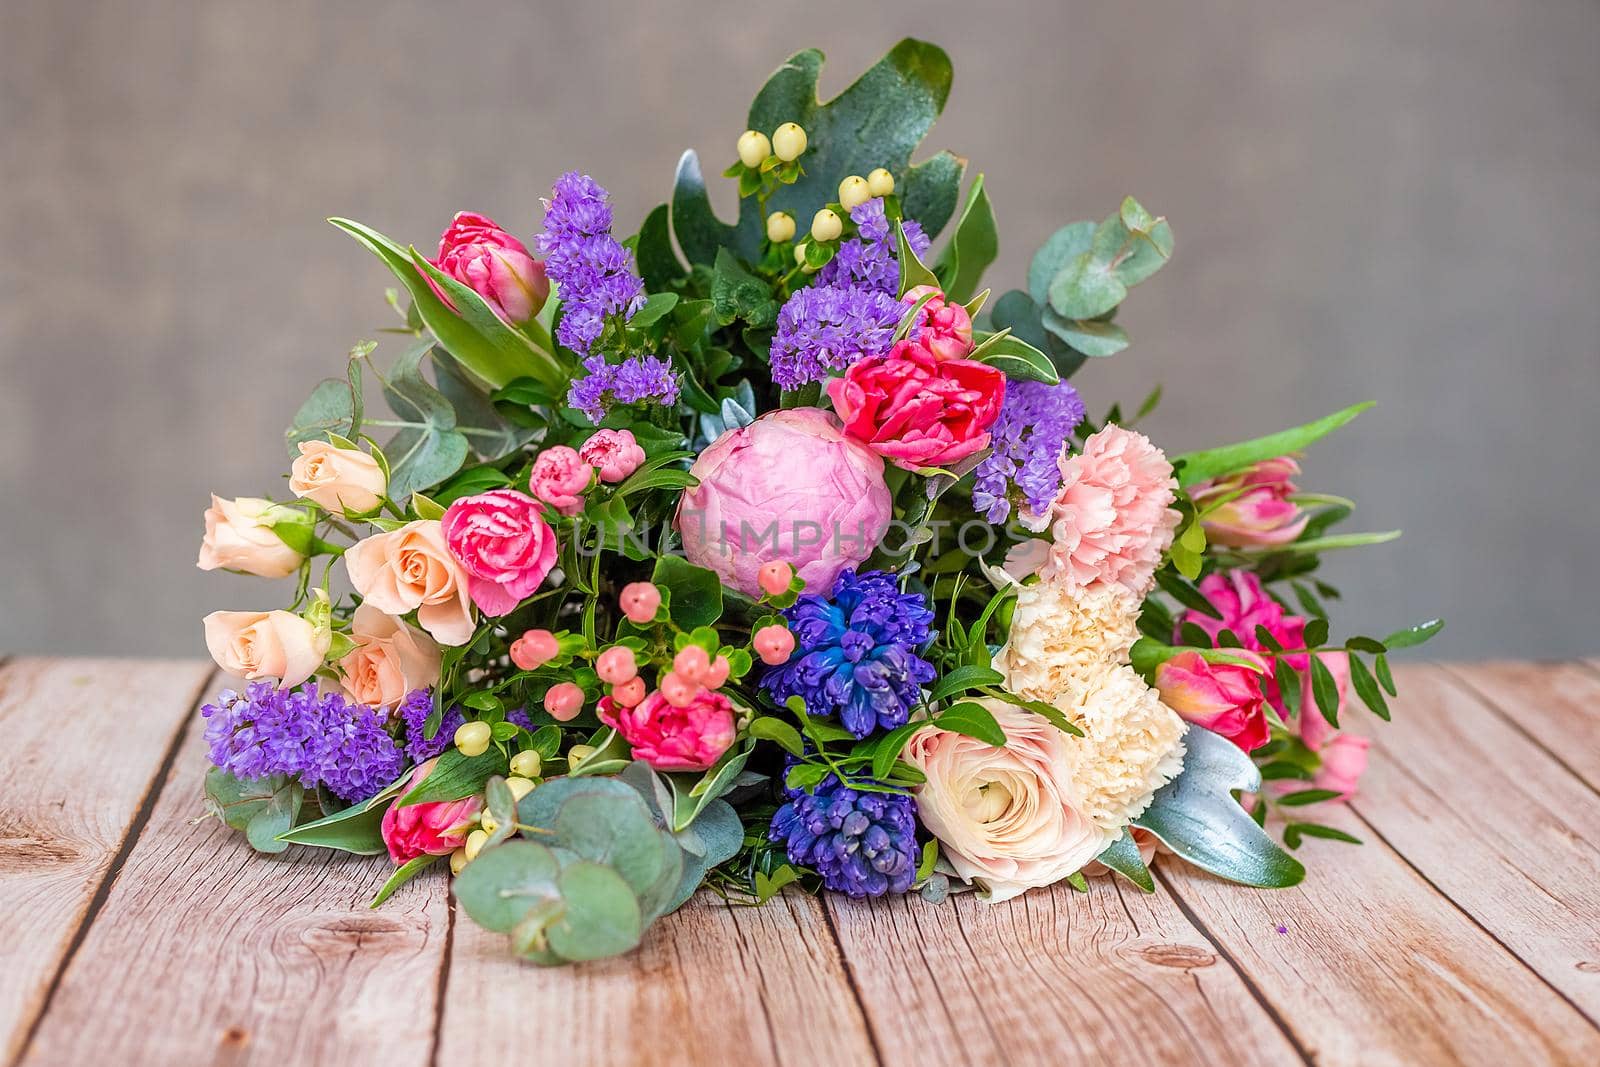 Close up view of a beautiful bouquet of mixed coloful flowers on wooden table. by galinasharapova